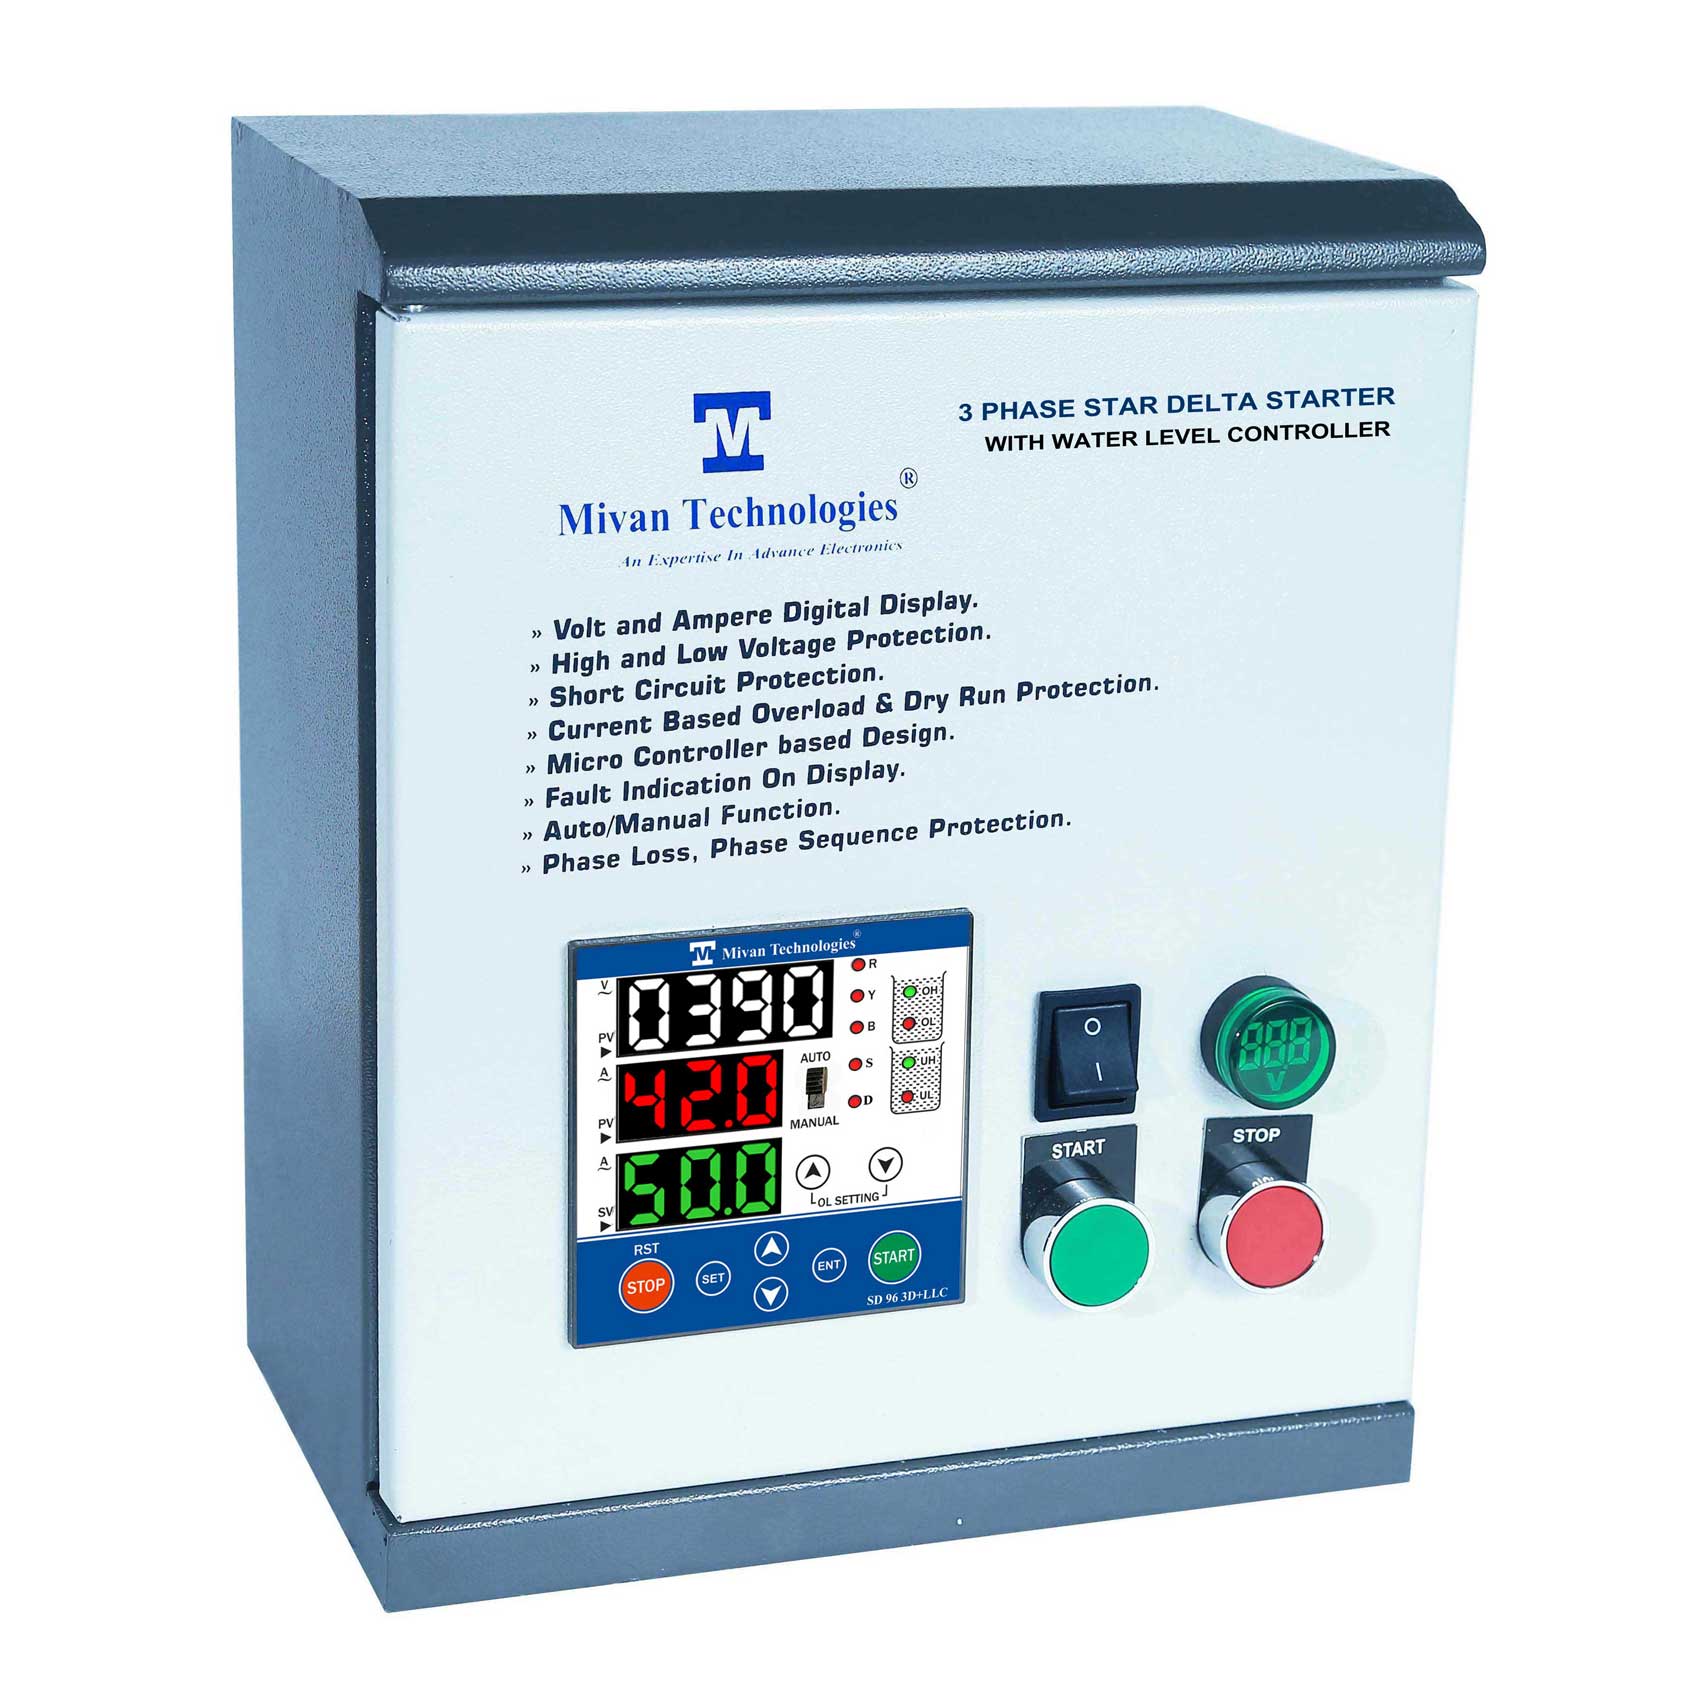 3 phase 3 display Heavy Duty water level controller with Star Delta motor starter with HV LV OL Dry protection with Auto switch spp and timer SD252518 for 10 HP motor